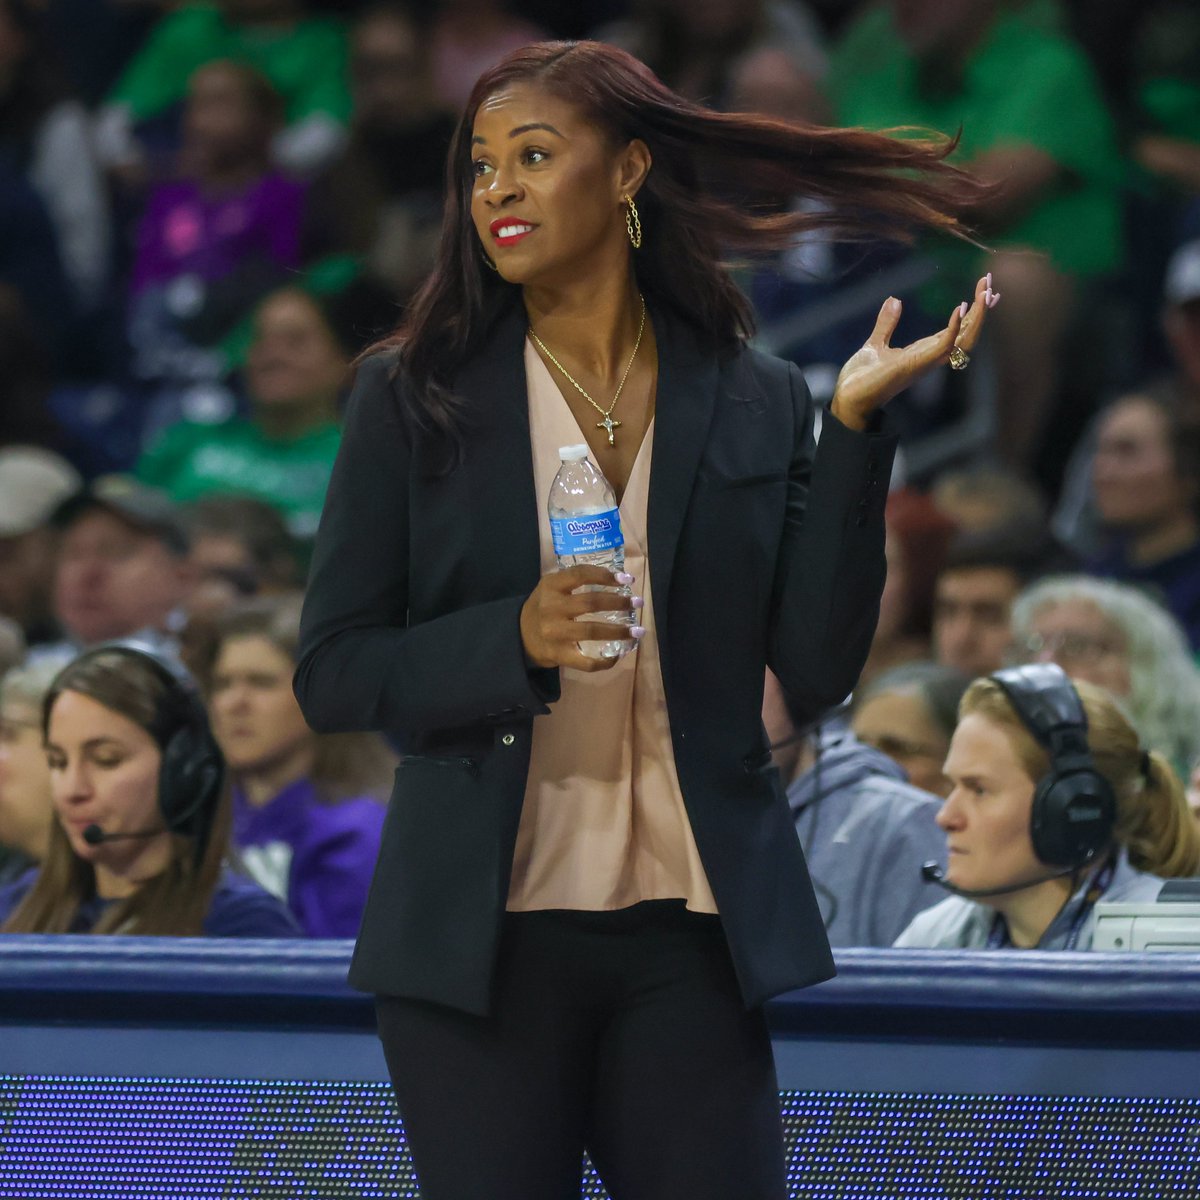 Notre Dame finished ranked No. 11 in the final Associated Press Poll of the season for the second year in a row. The Fighting Irish are primed to break through the top 10 barrier next season, Niele Ivey's fifth as the program's head coach. on3.com/teams/notre-da…